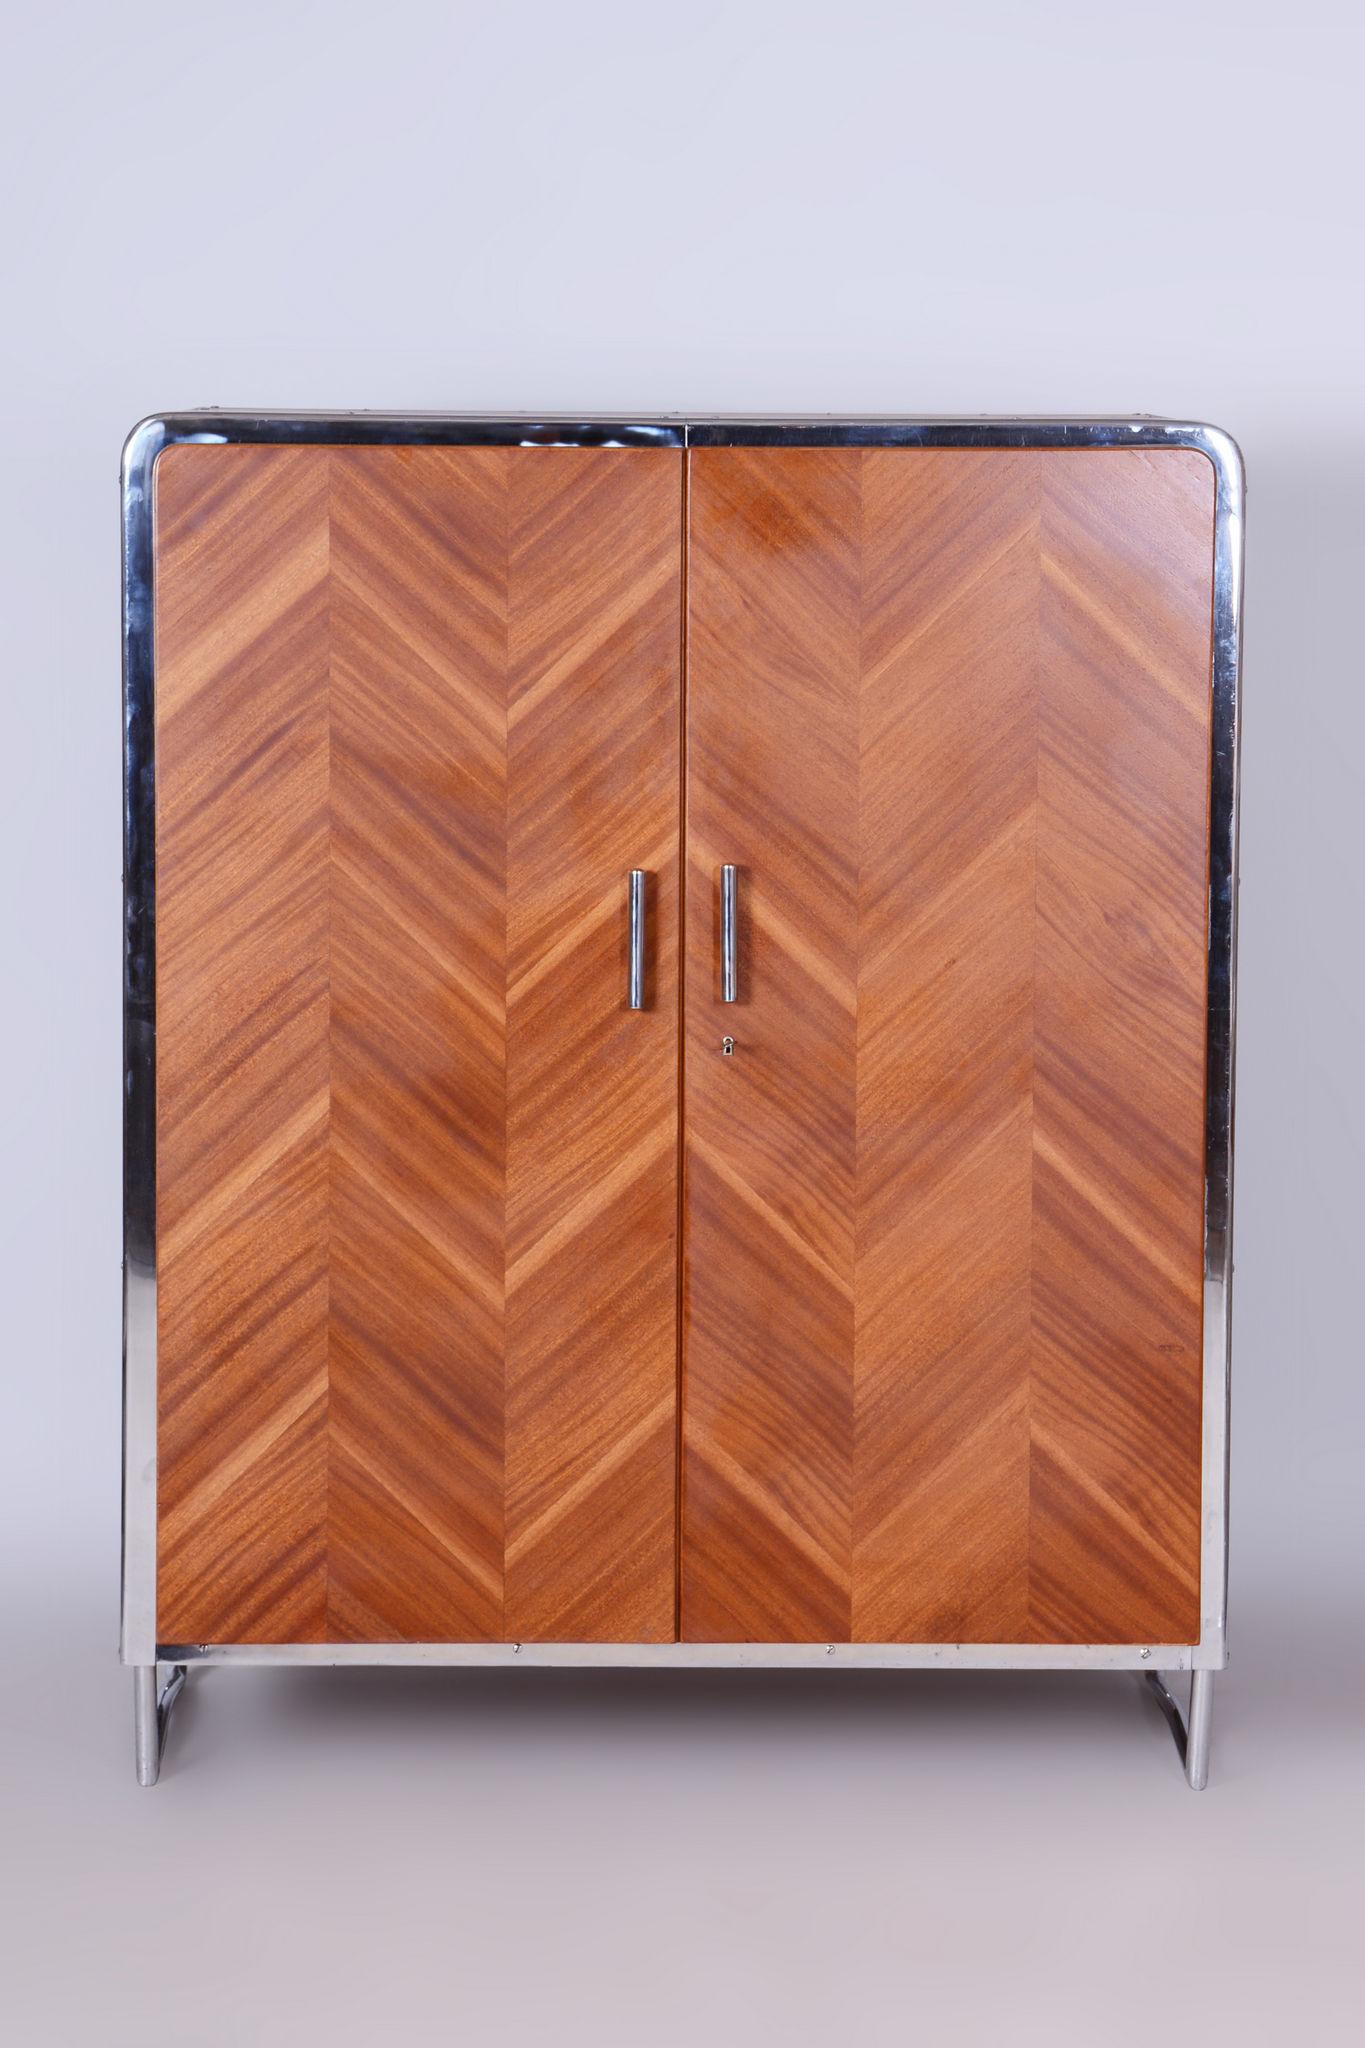 Made by Slezak Factories, a unique Czech furniture brand specialising on chrome and bent metal furniture

The mahogany veneer on the door is folded into a tree pattern.

The cabinet was manufactured by Slezák factories under license from Thonet.

It